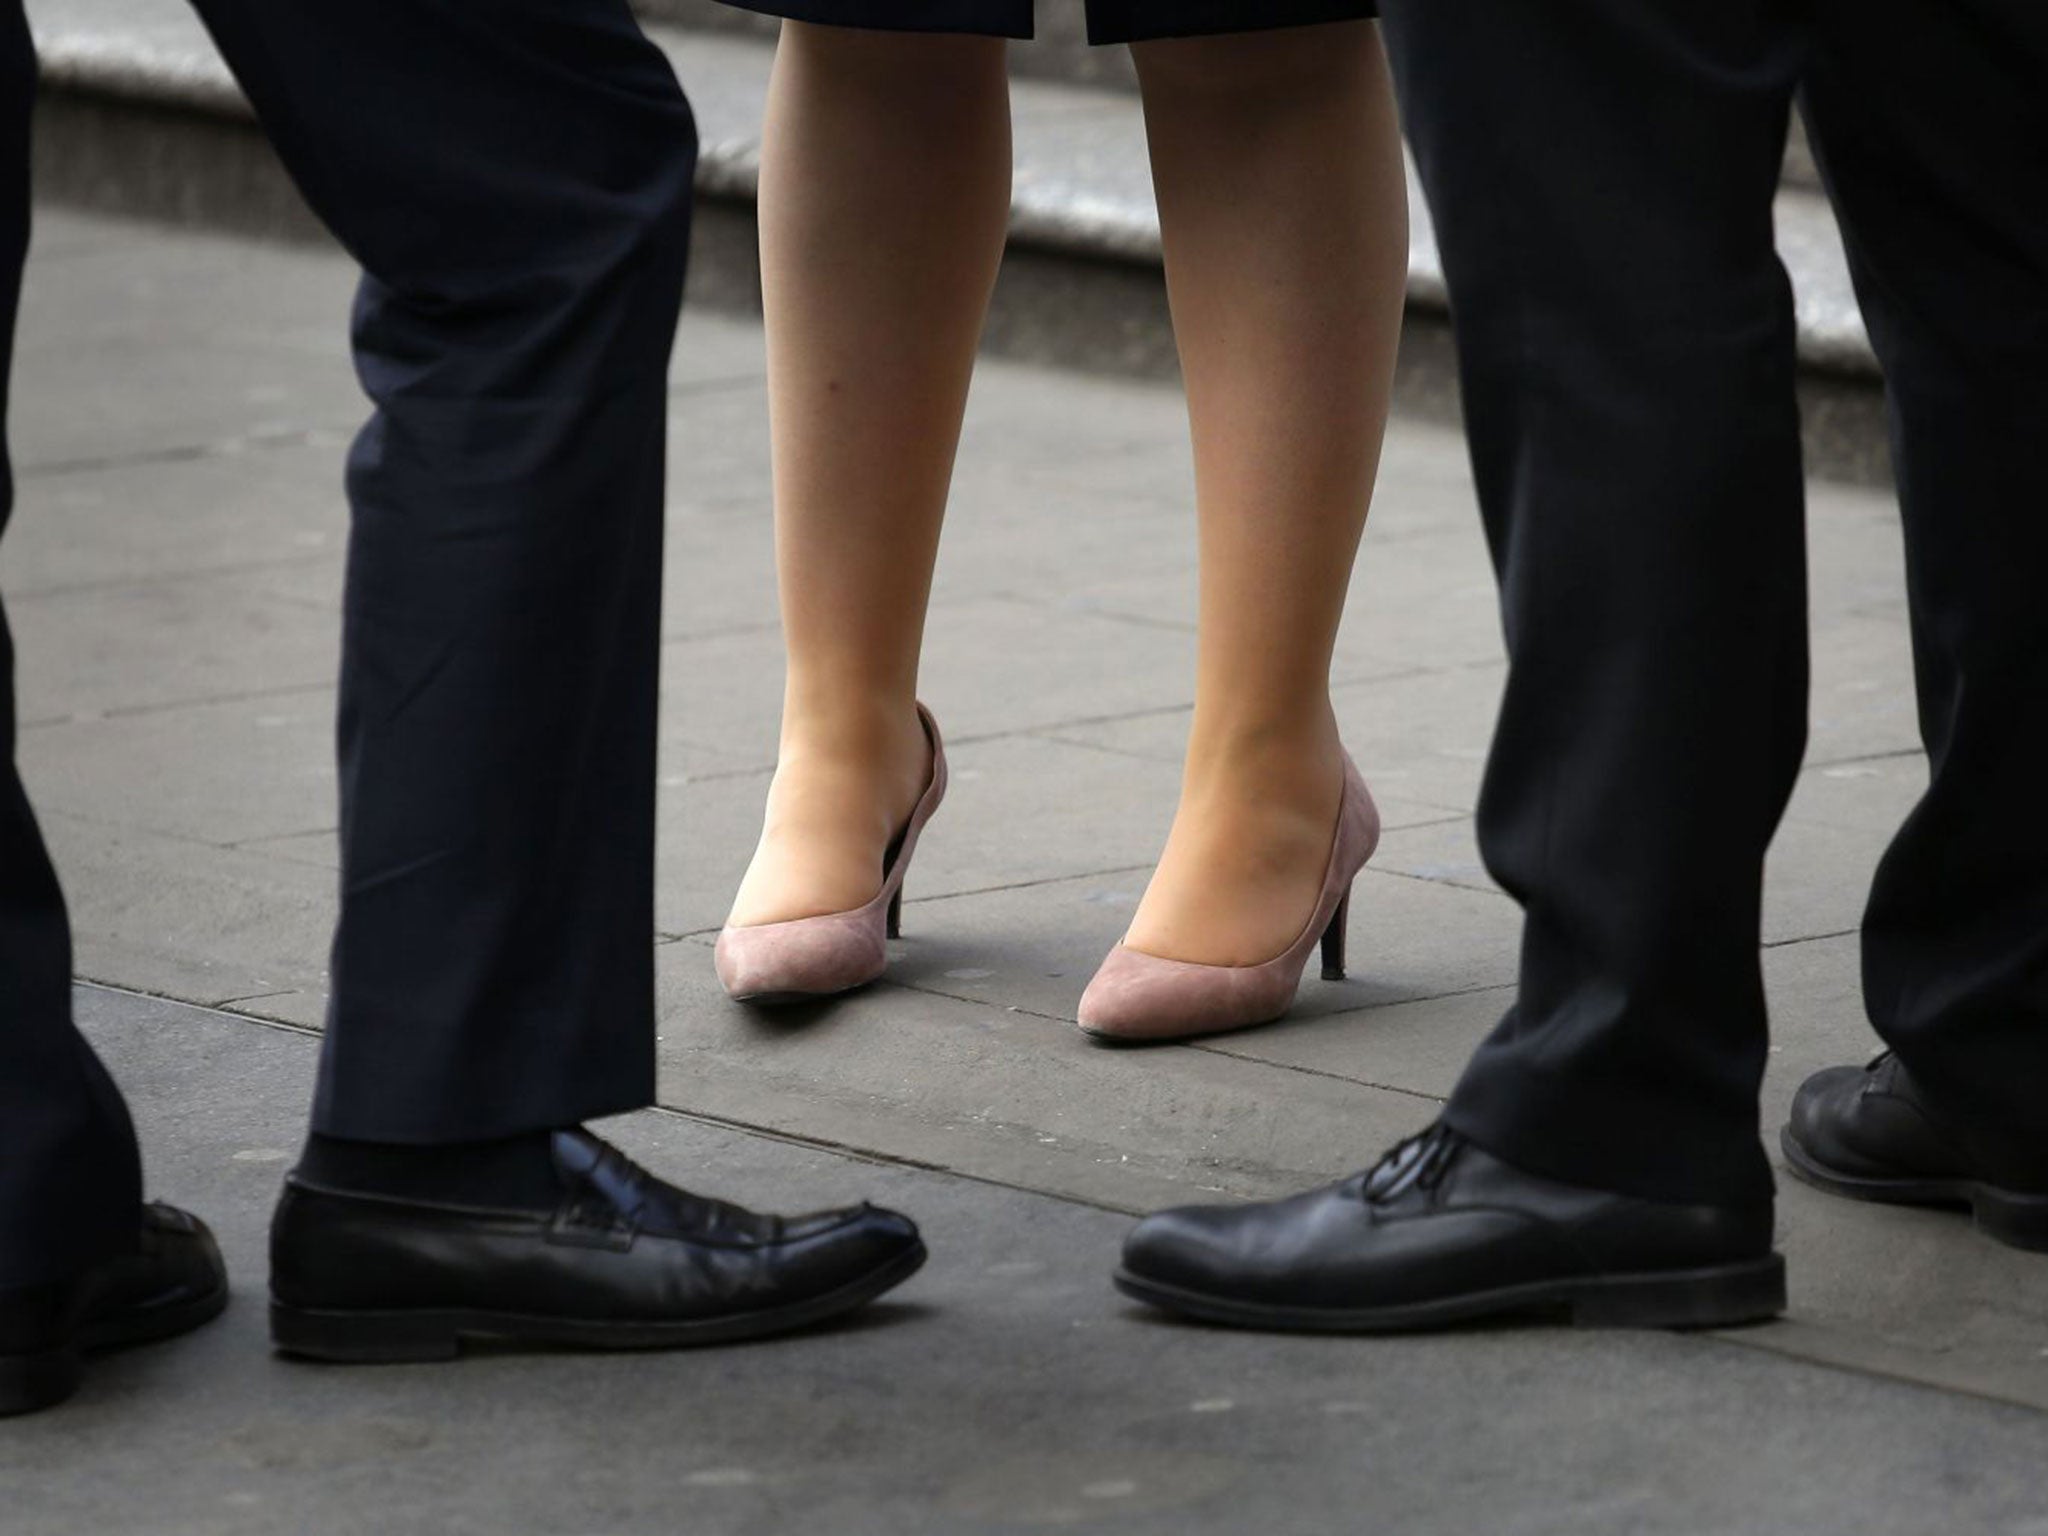 A member of the the country’s opposition party had said forcing women to wear high heels in the workplace is ‘outdated’